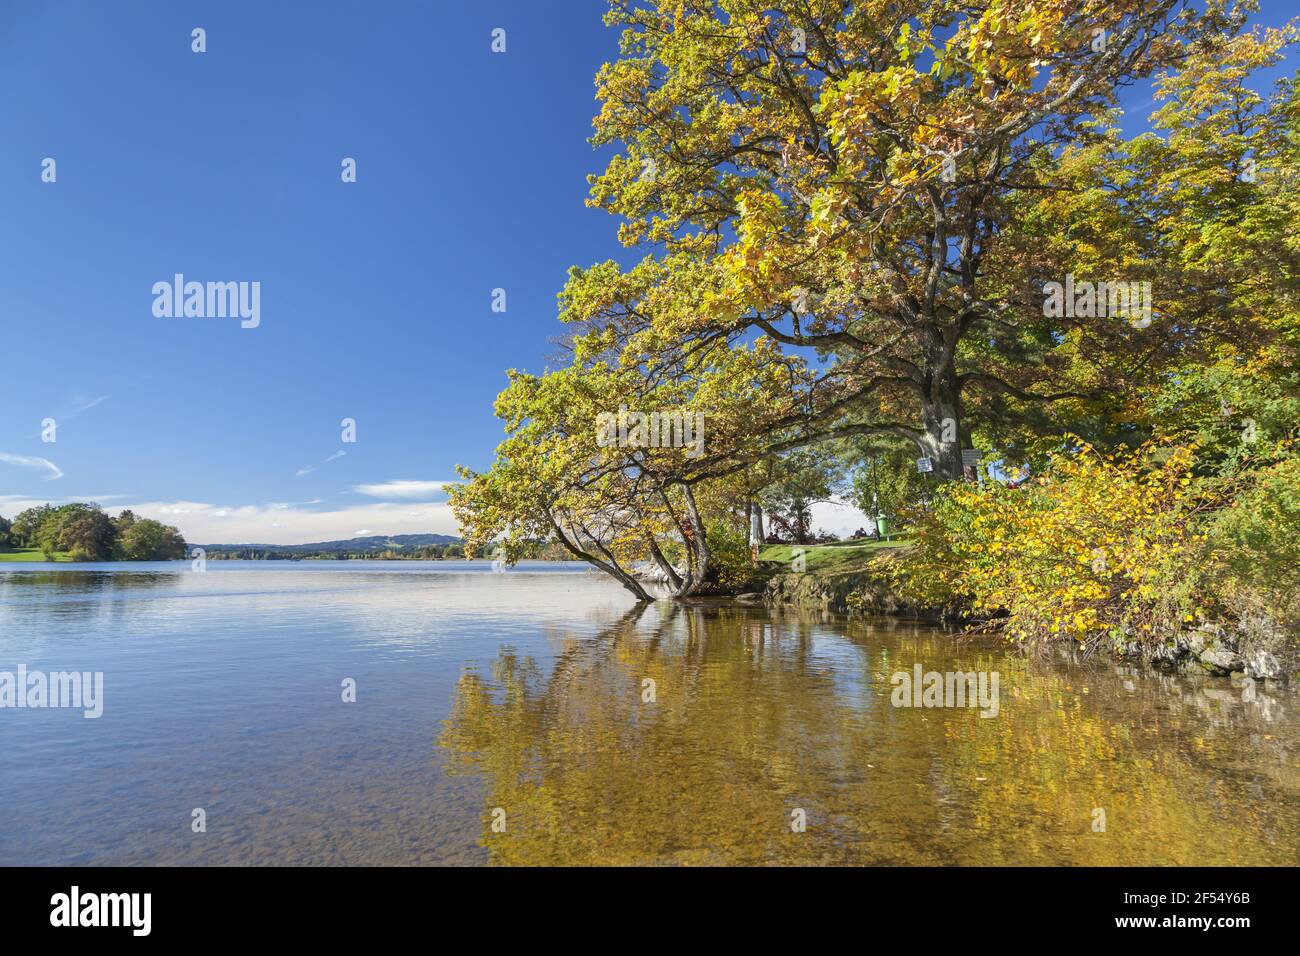 Geographie / Reisen, Deutschland, Bayern, Seehaus am Staffelsee, Herbst in St., Additional-Rights-Clearance-Info-not-available Stockfoto